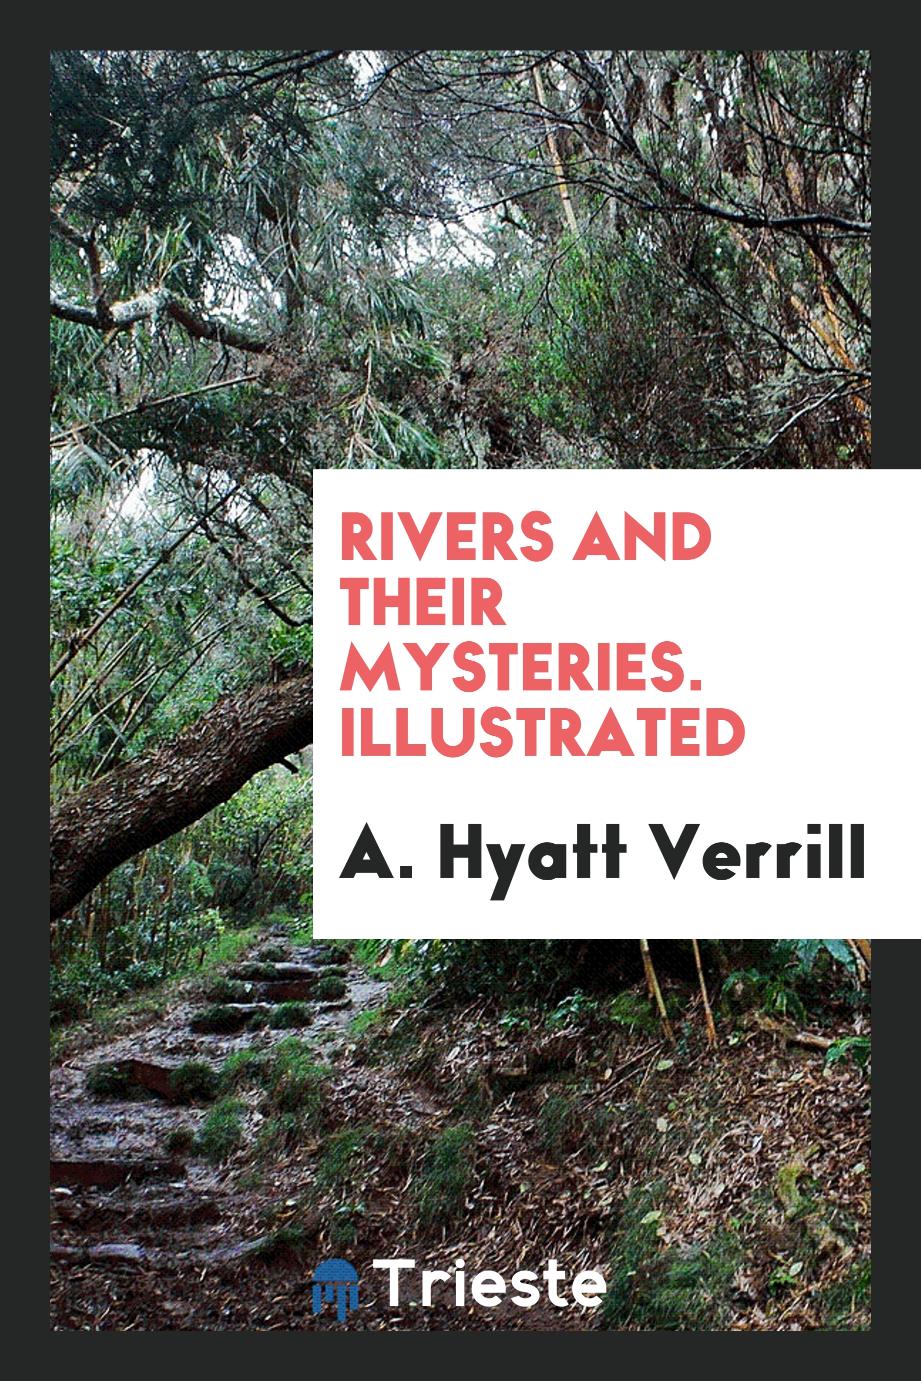 Rivers and their mysteries. Illustrated